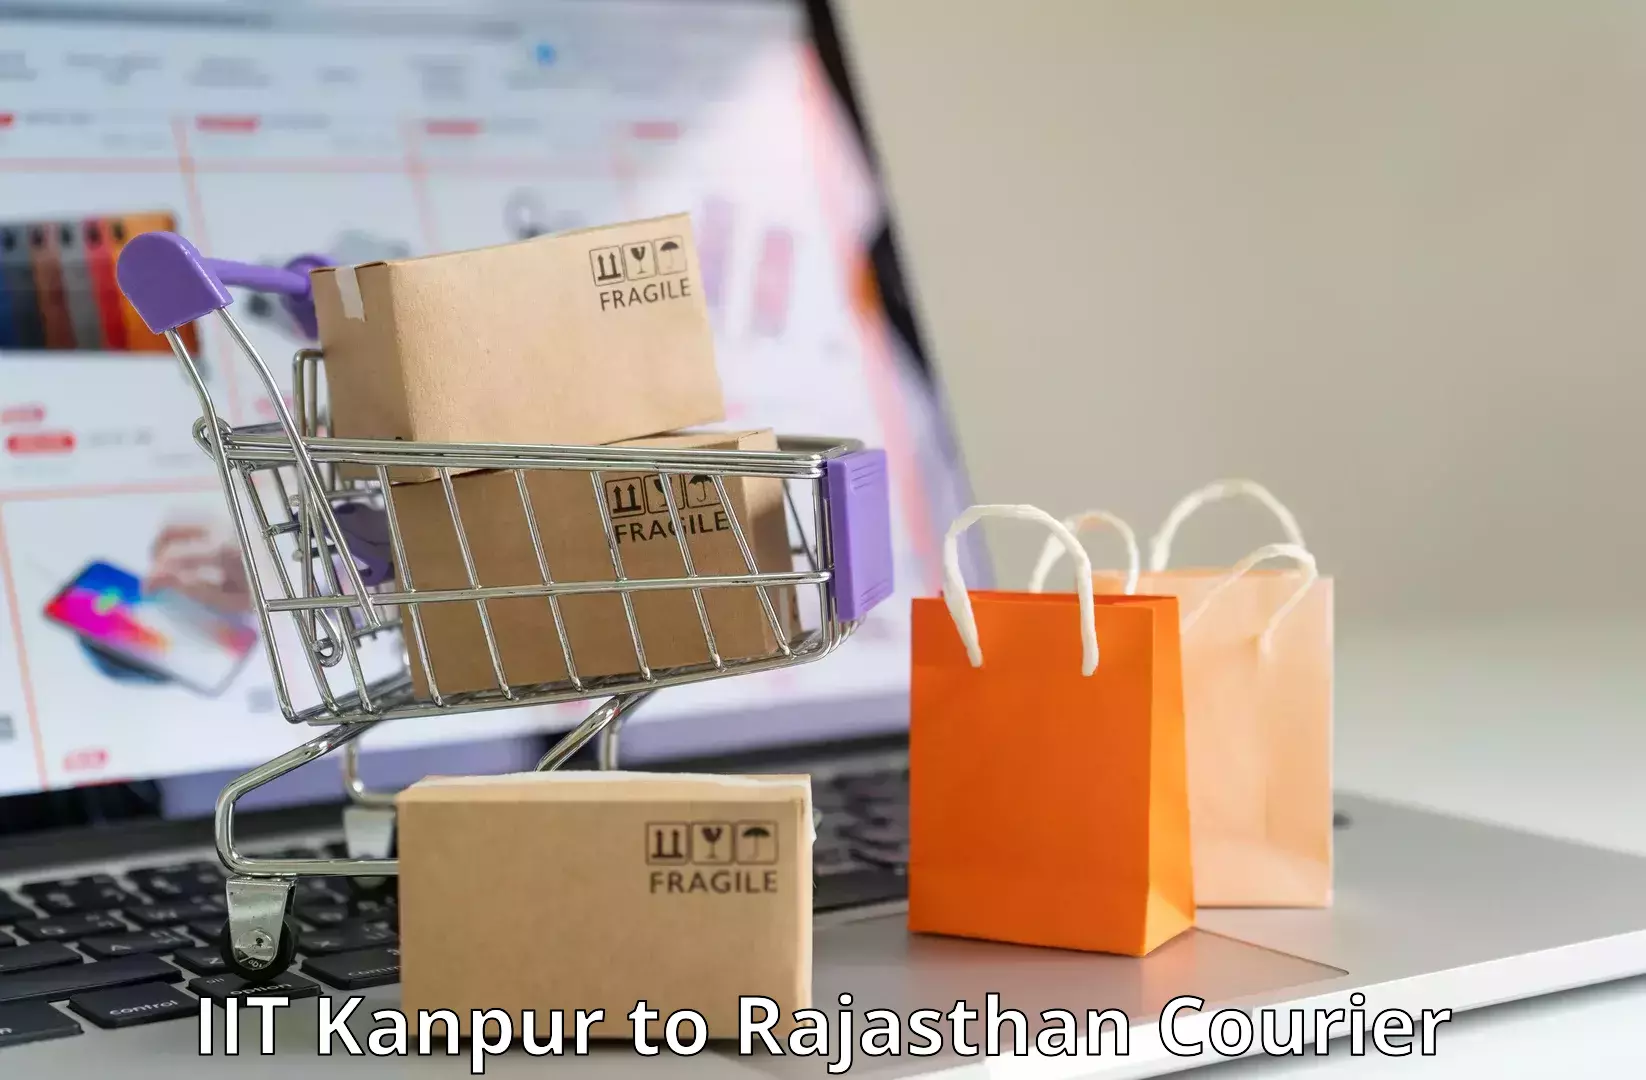 Customer-centric shipping in IIT Kanpur to Deoli